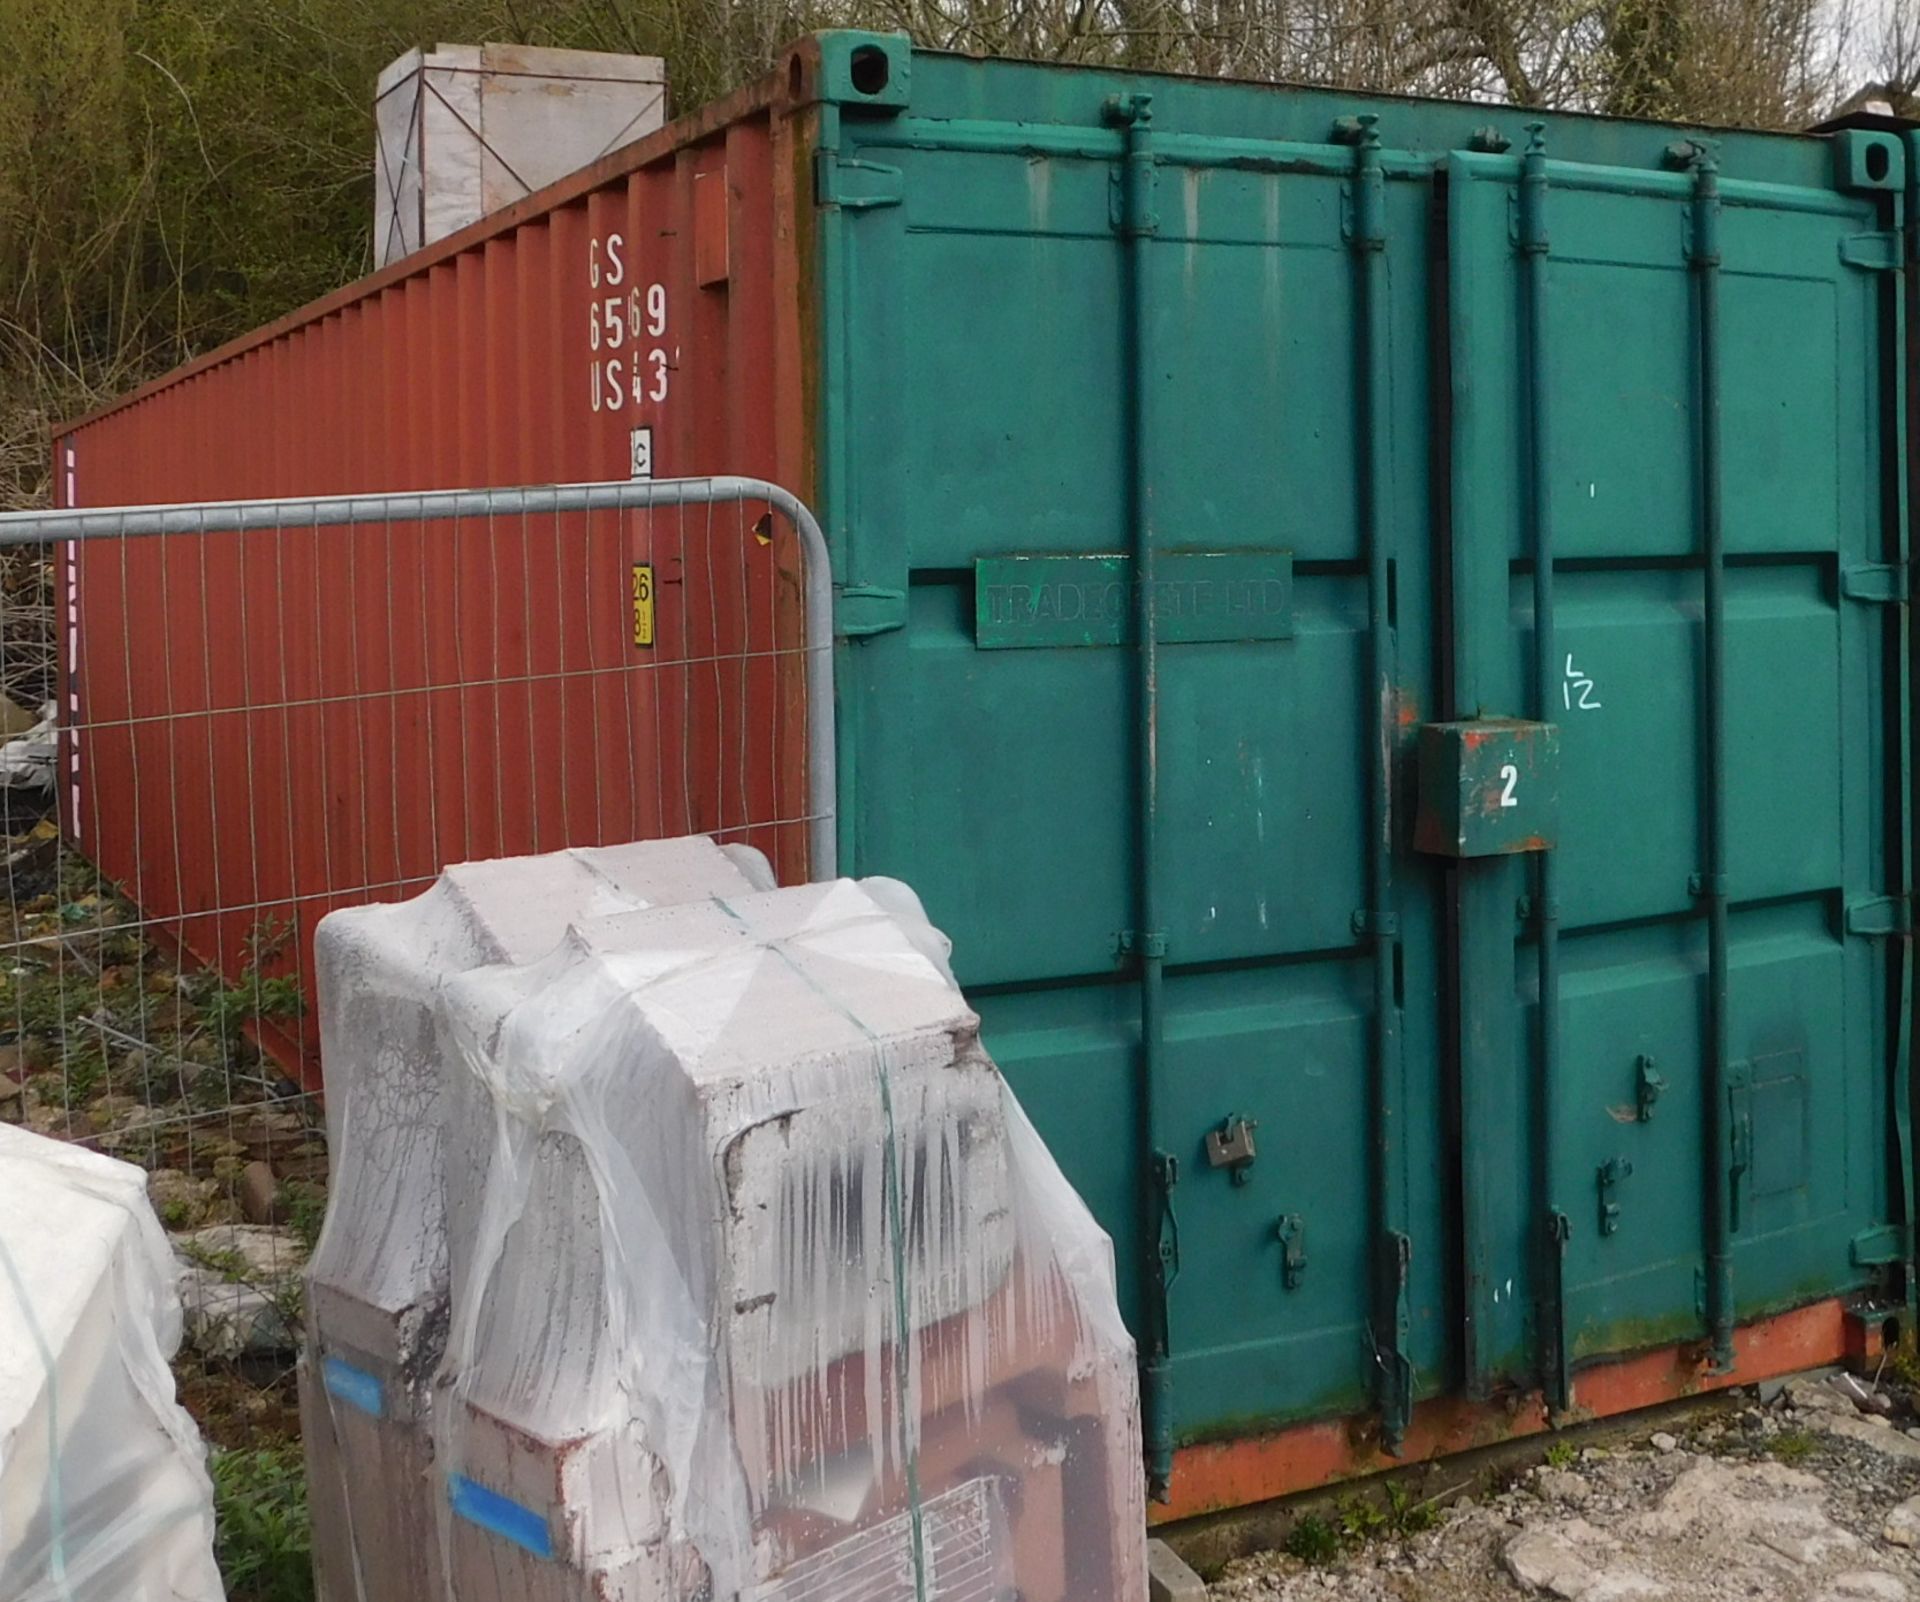 40ft Container (Collection Delayed to Tuesday 16th April or Wednesday 17th April) (Located